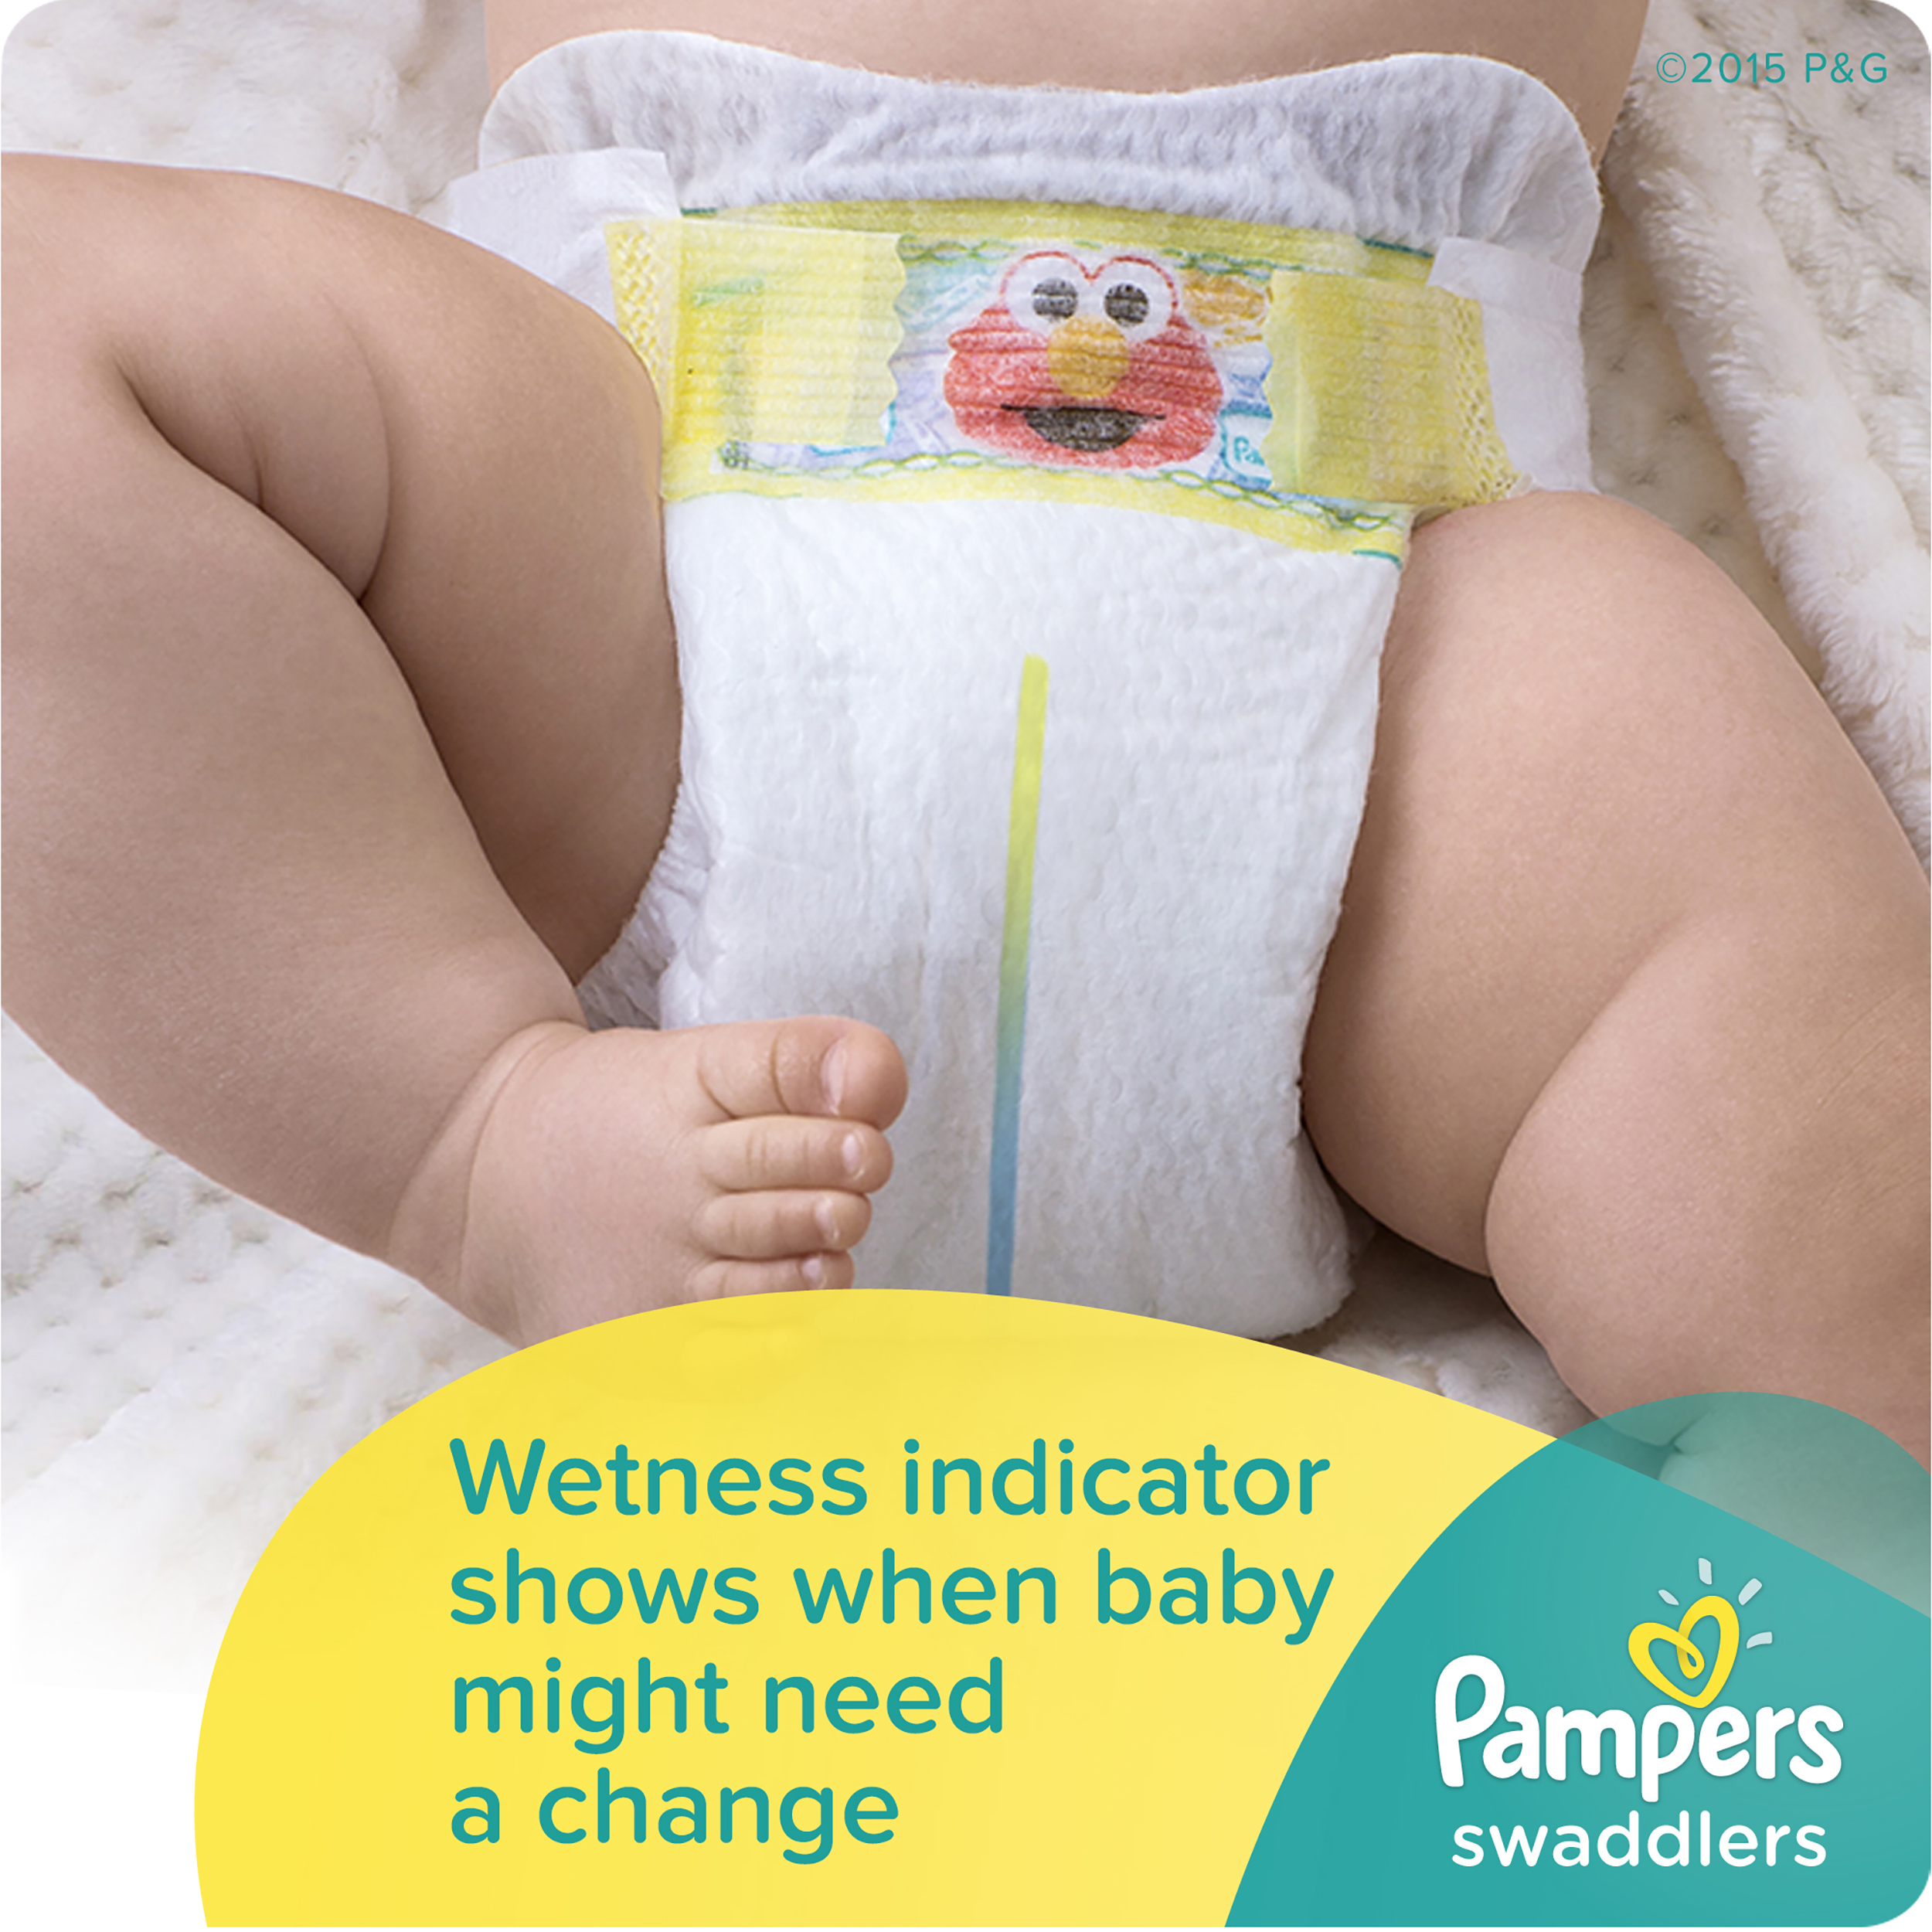 Pampers Swaddlers Diapers Size 3 162 count - image 5 of 10